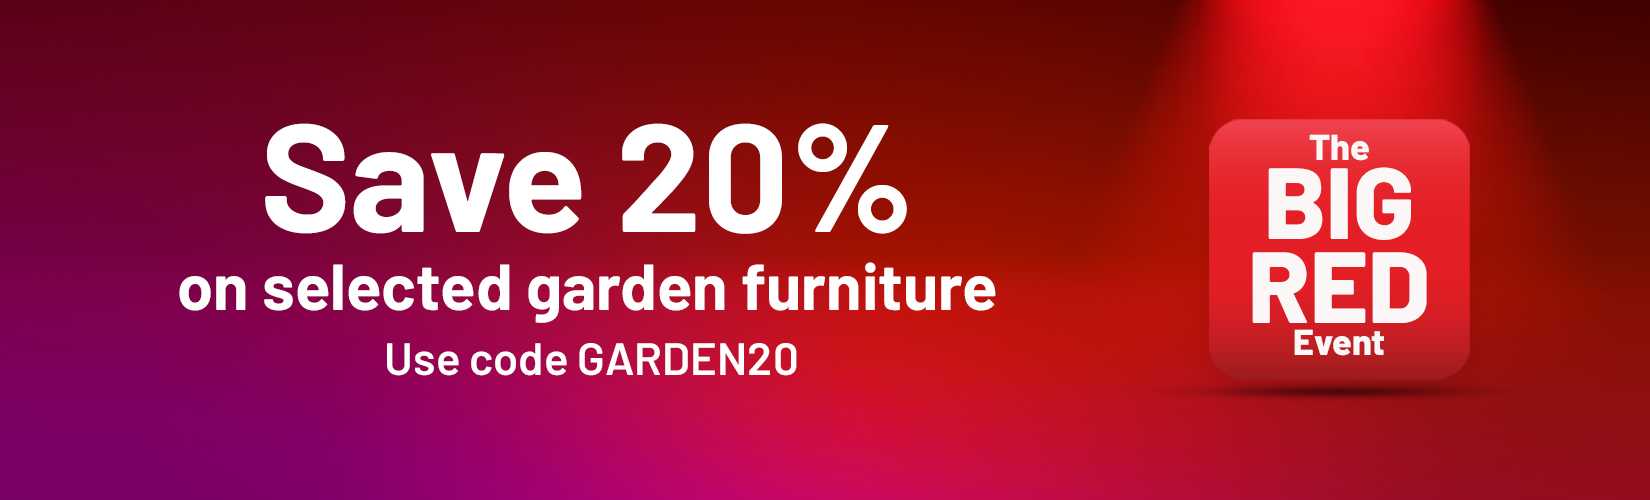 Save 20% on selected garden furniture. Use code GARDEN20 at the checkout. 